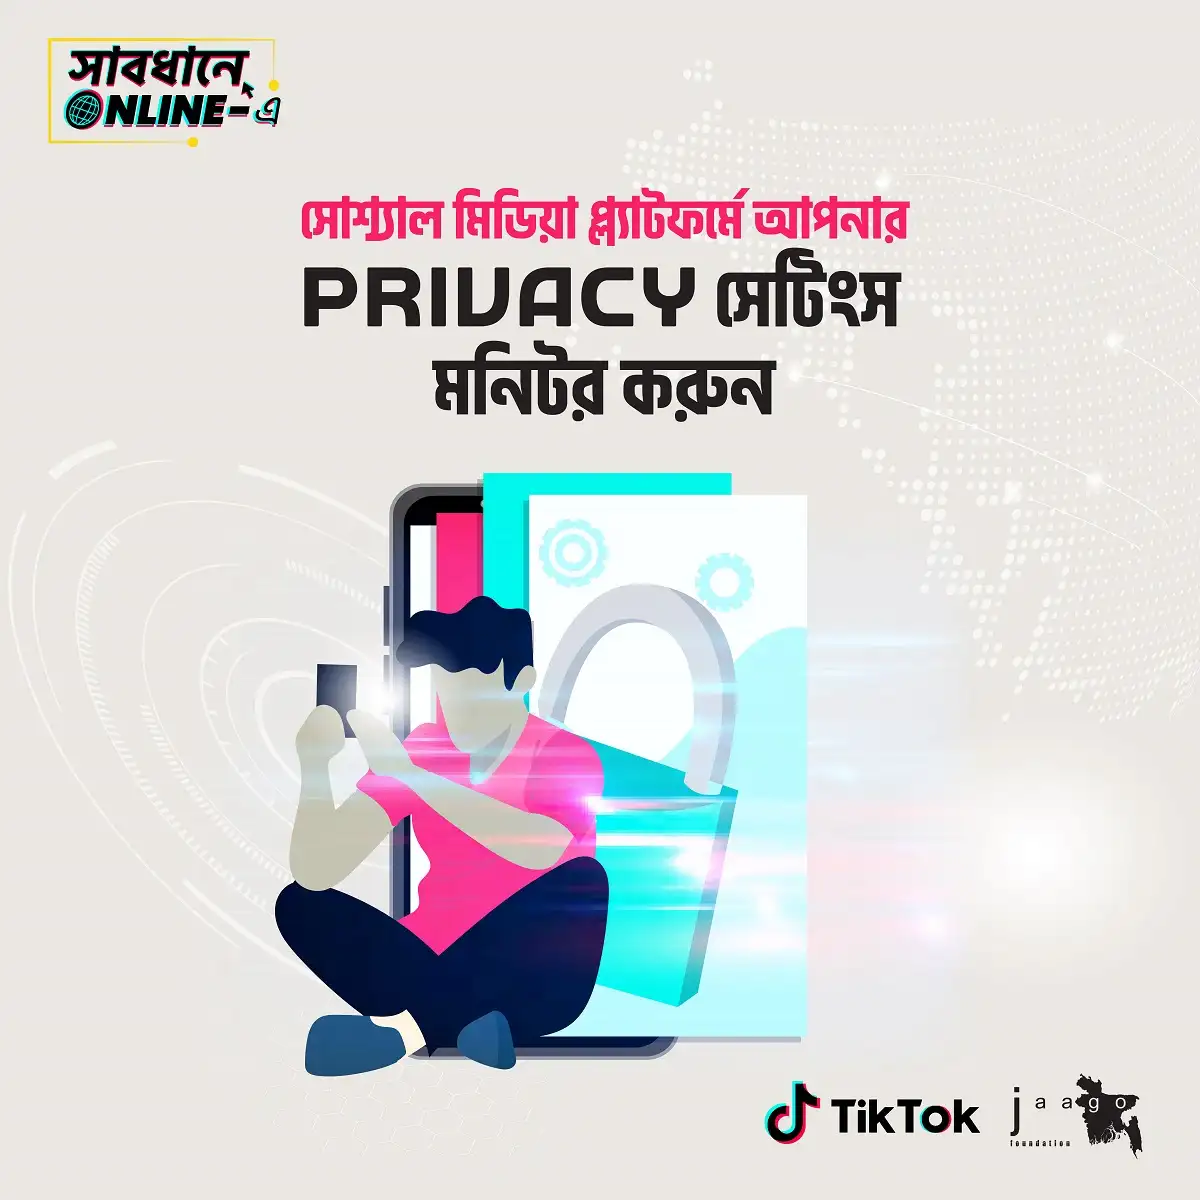 Monitor-Privacy-Settings-around-social-media-Shabdhane-Online-e-A-project-by-JAAGO-Foundation